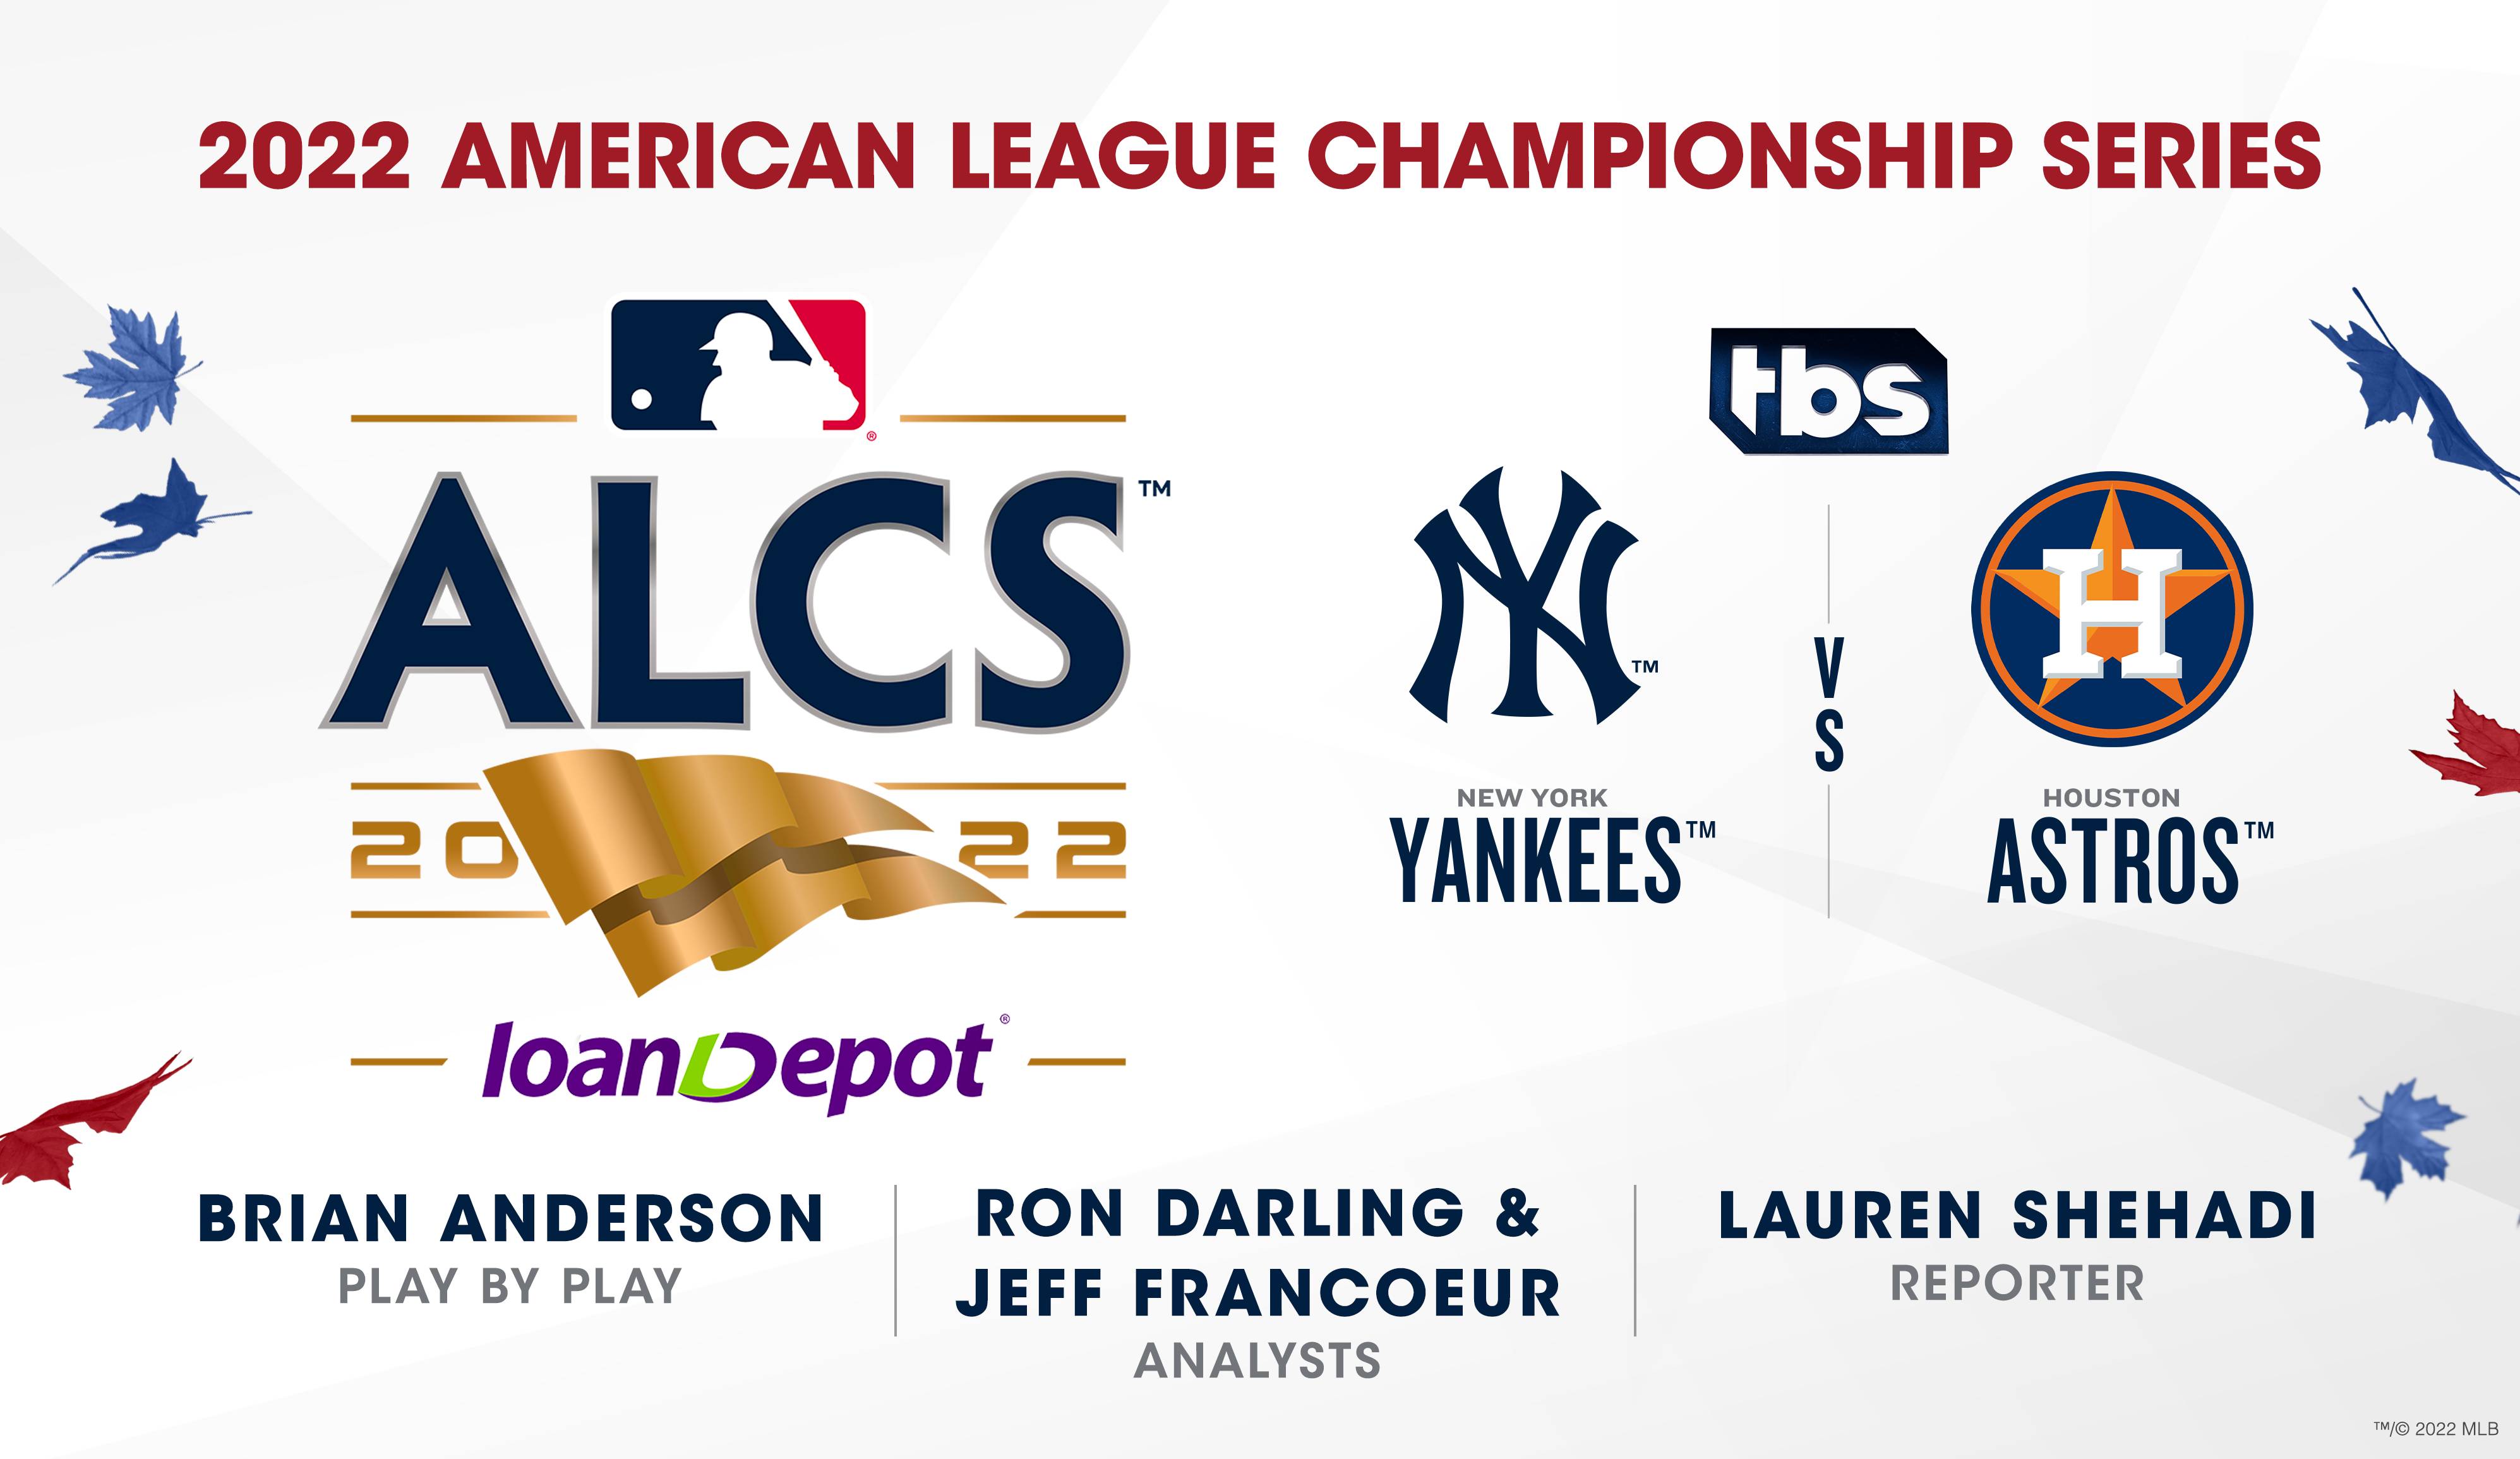 2022 MLB All-Star Game: TV channel, time, live stream, starting